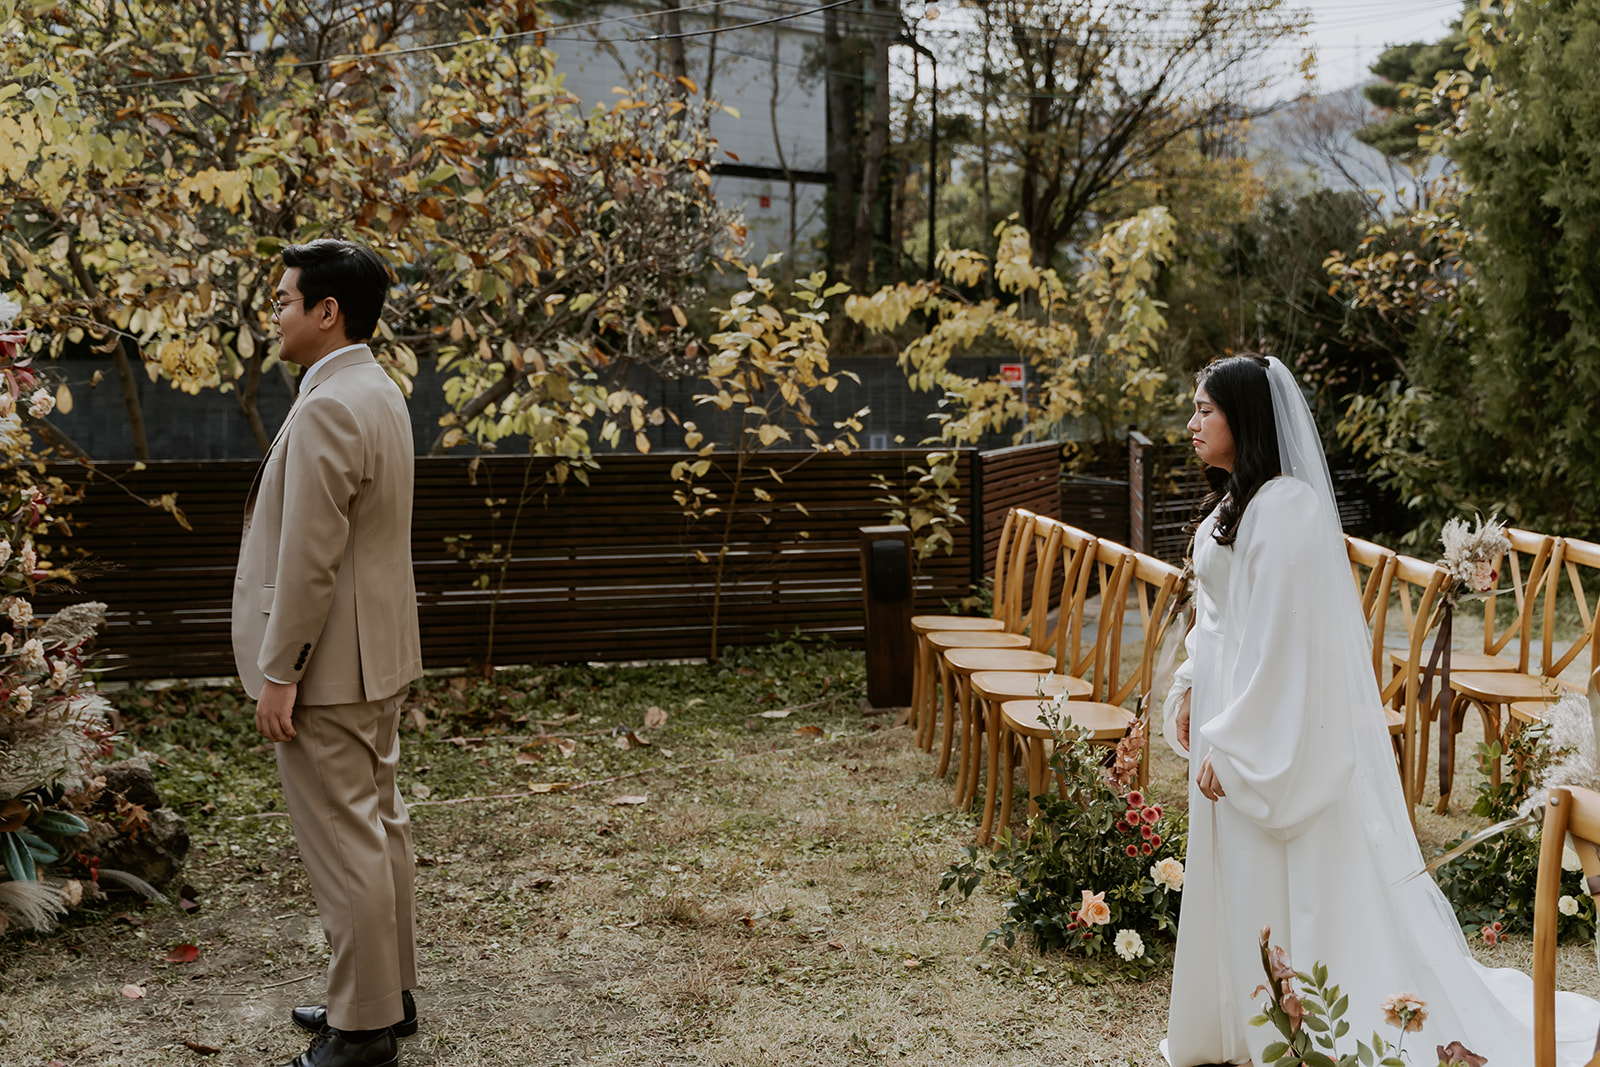 A man and woman in formal attire at their first look in a garden with autumn foliage.